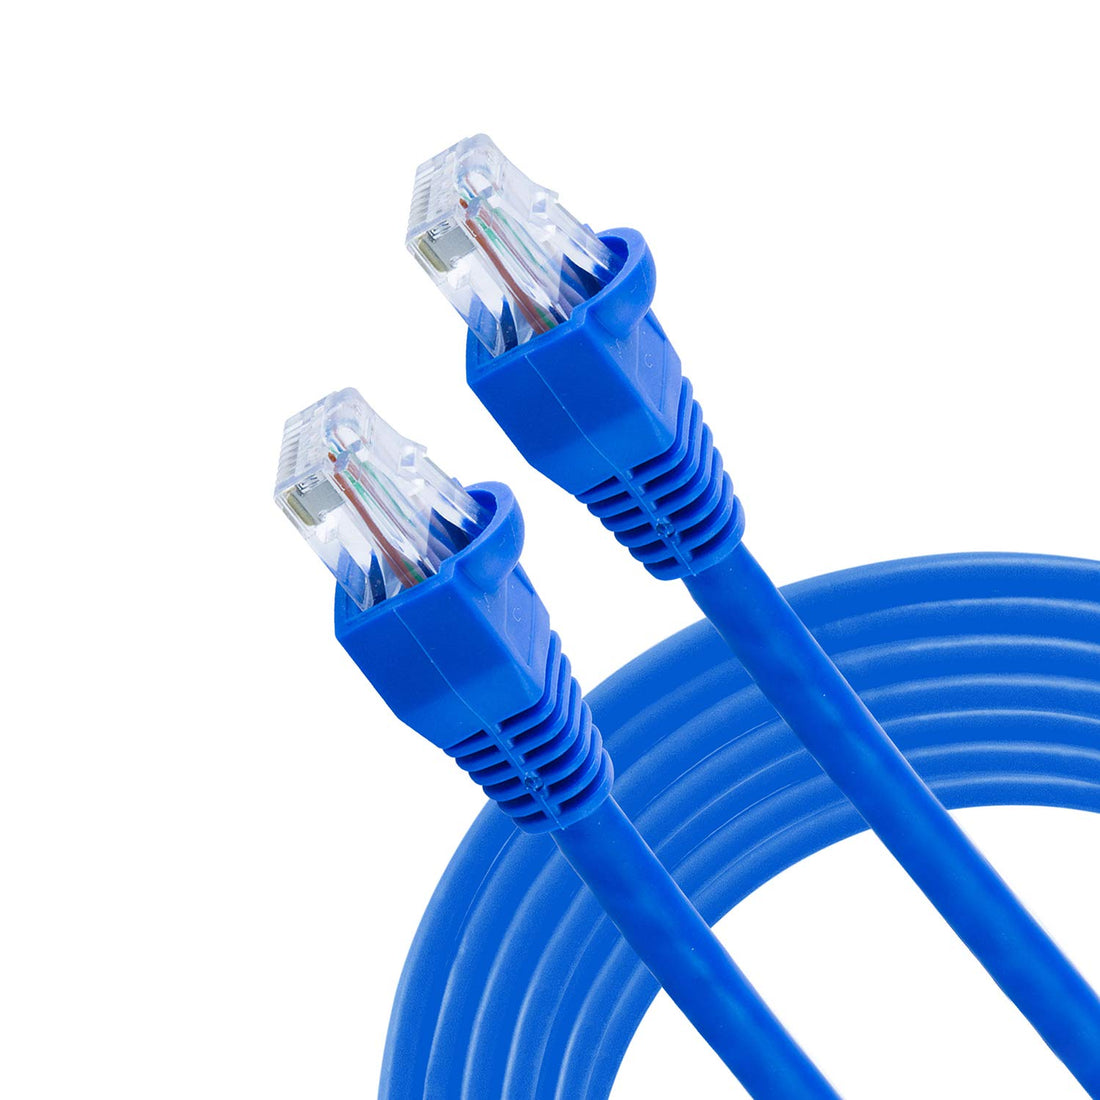 GE High Speed Modem Internet Cable, 14 Foot, RJ11 Ethernet, Phone Line Networking, cm Rated for in-Wall Use, Blue, 35288